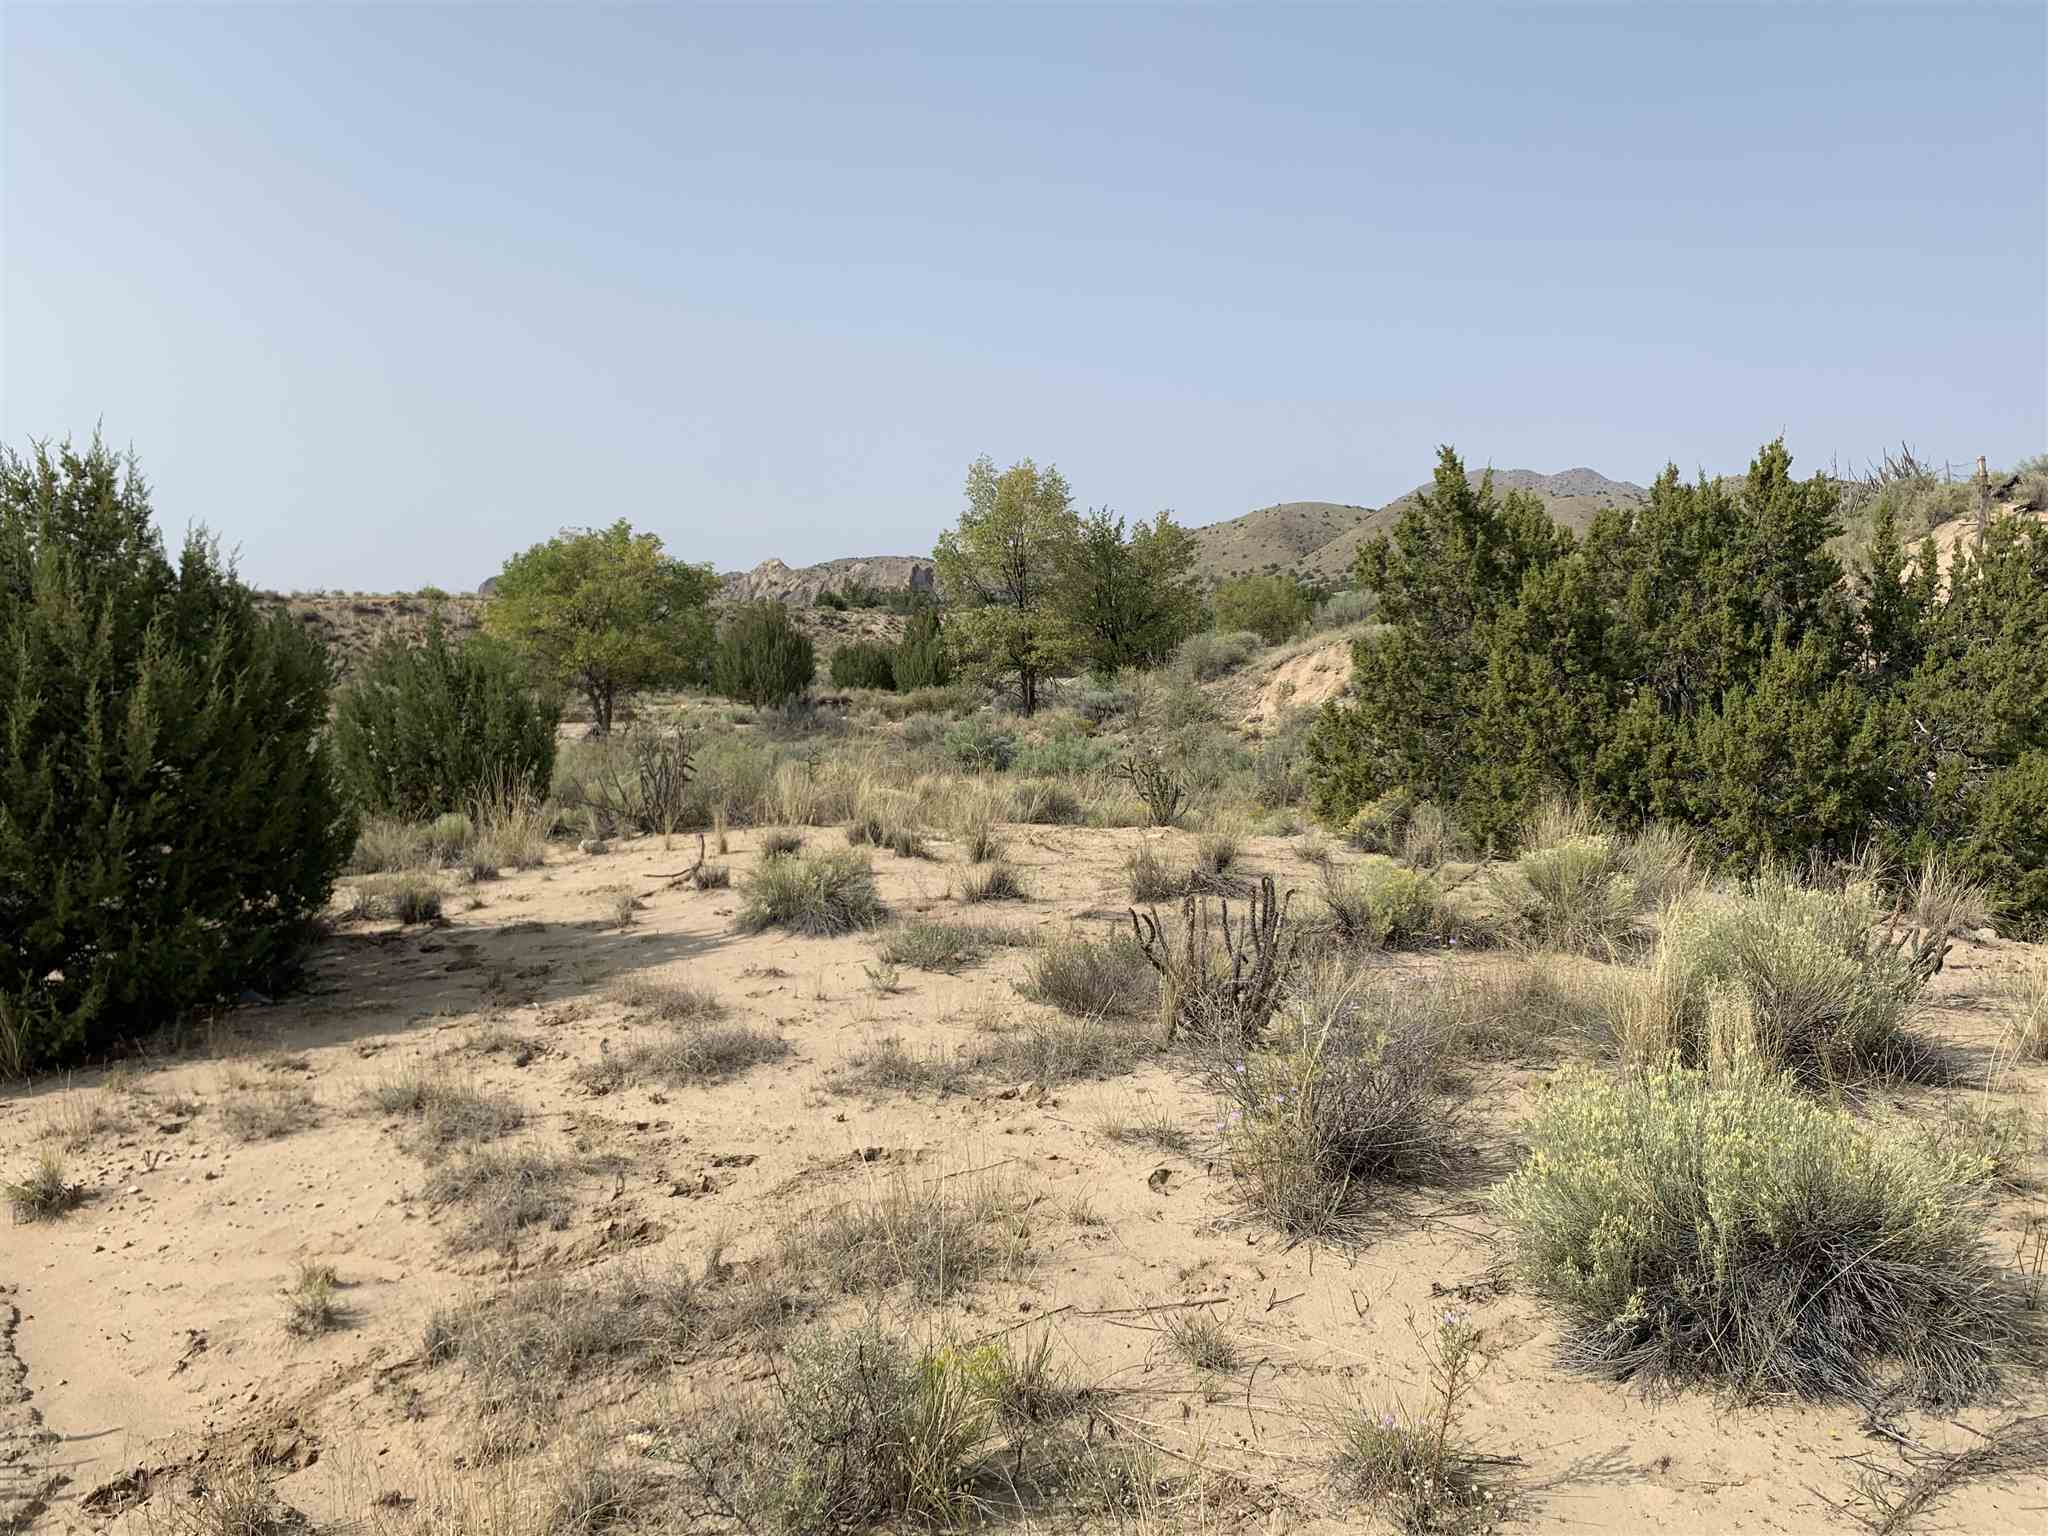 3107 NM Highway 14, Cerrillos, New Mexico 87010, ,Land,For Sale,3107 NM Highway 14,202004194